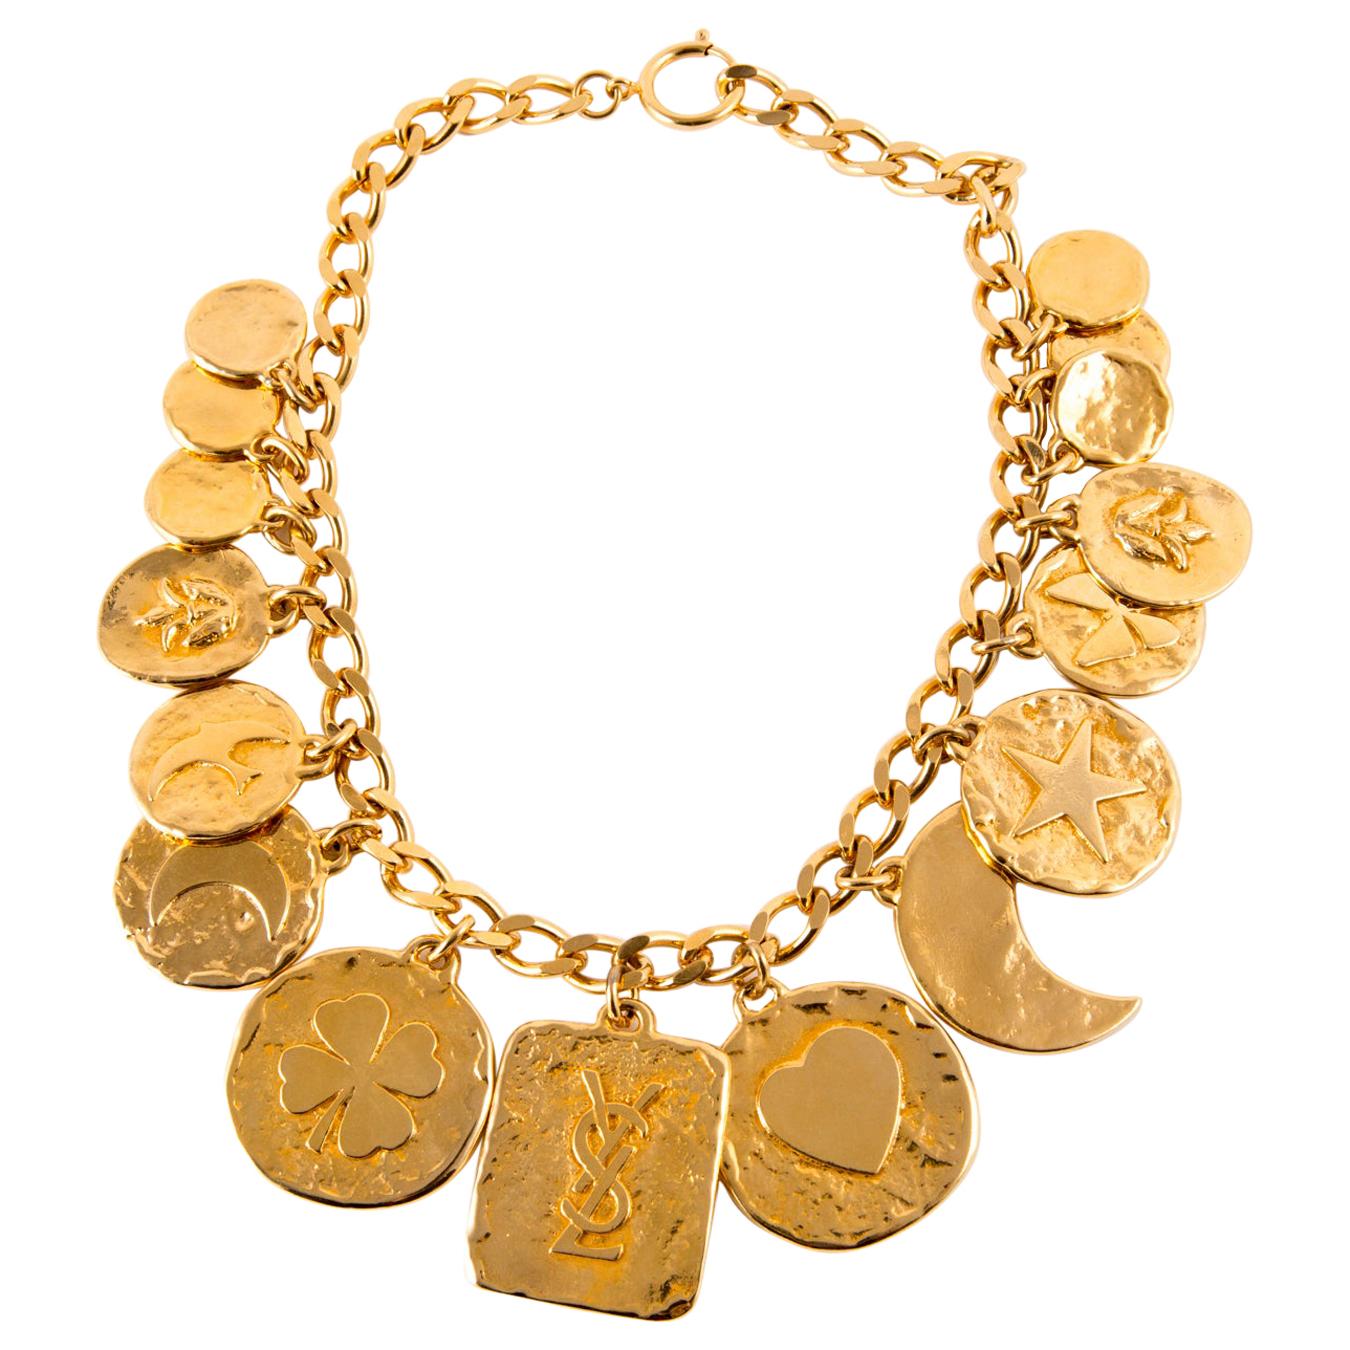  1980s YSL Yves Saint Laurent Charms Chunky Chain Necklace   